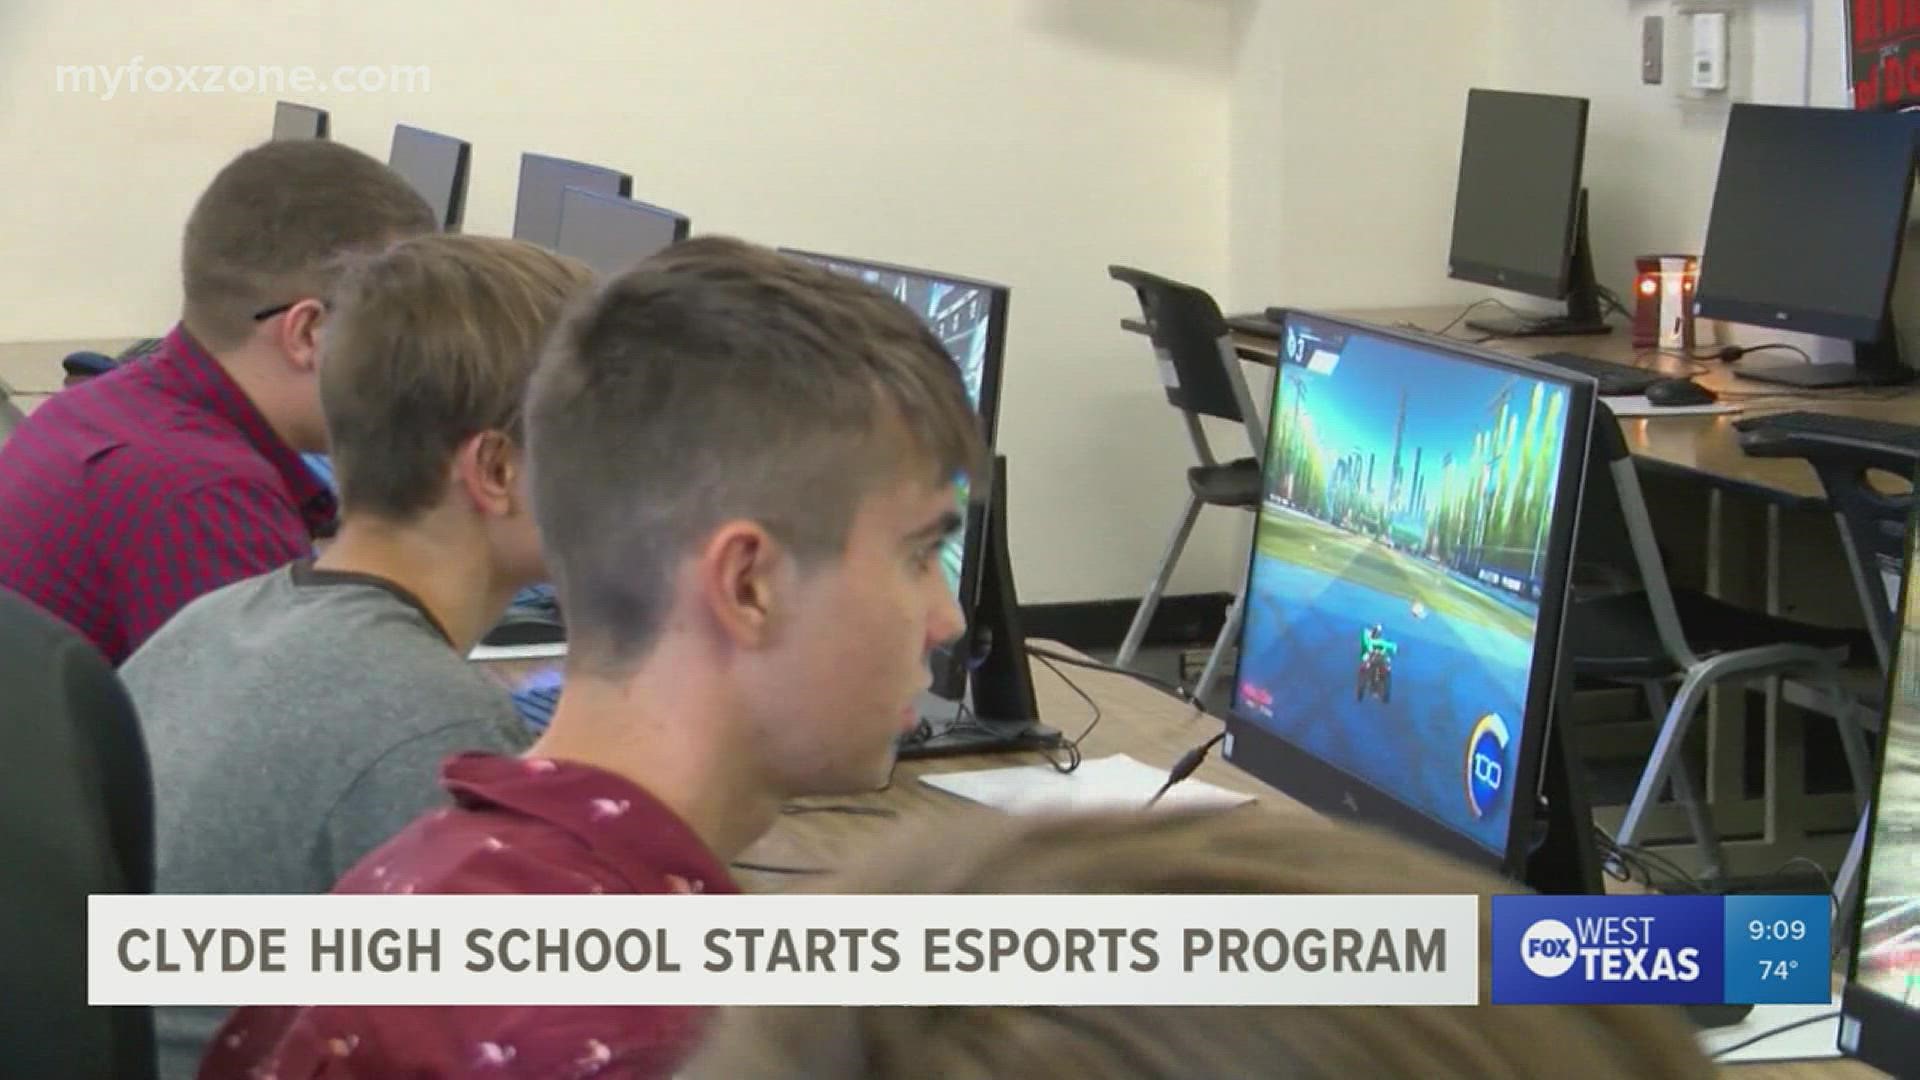 Esports programs are popping up in high schools all over Texas, bringing together normally isolated students.